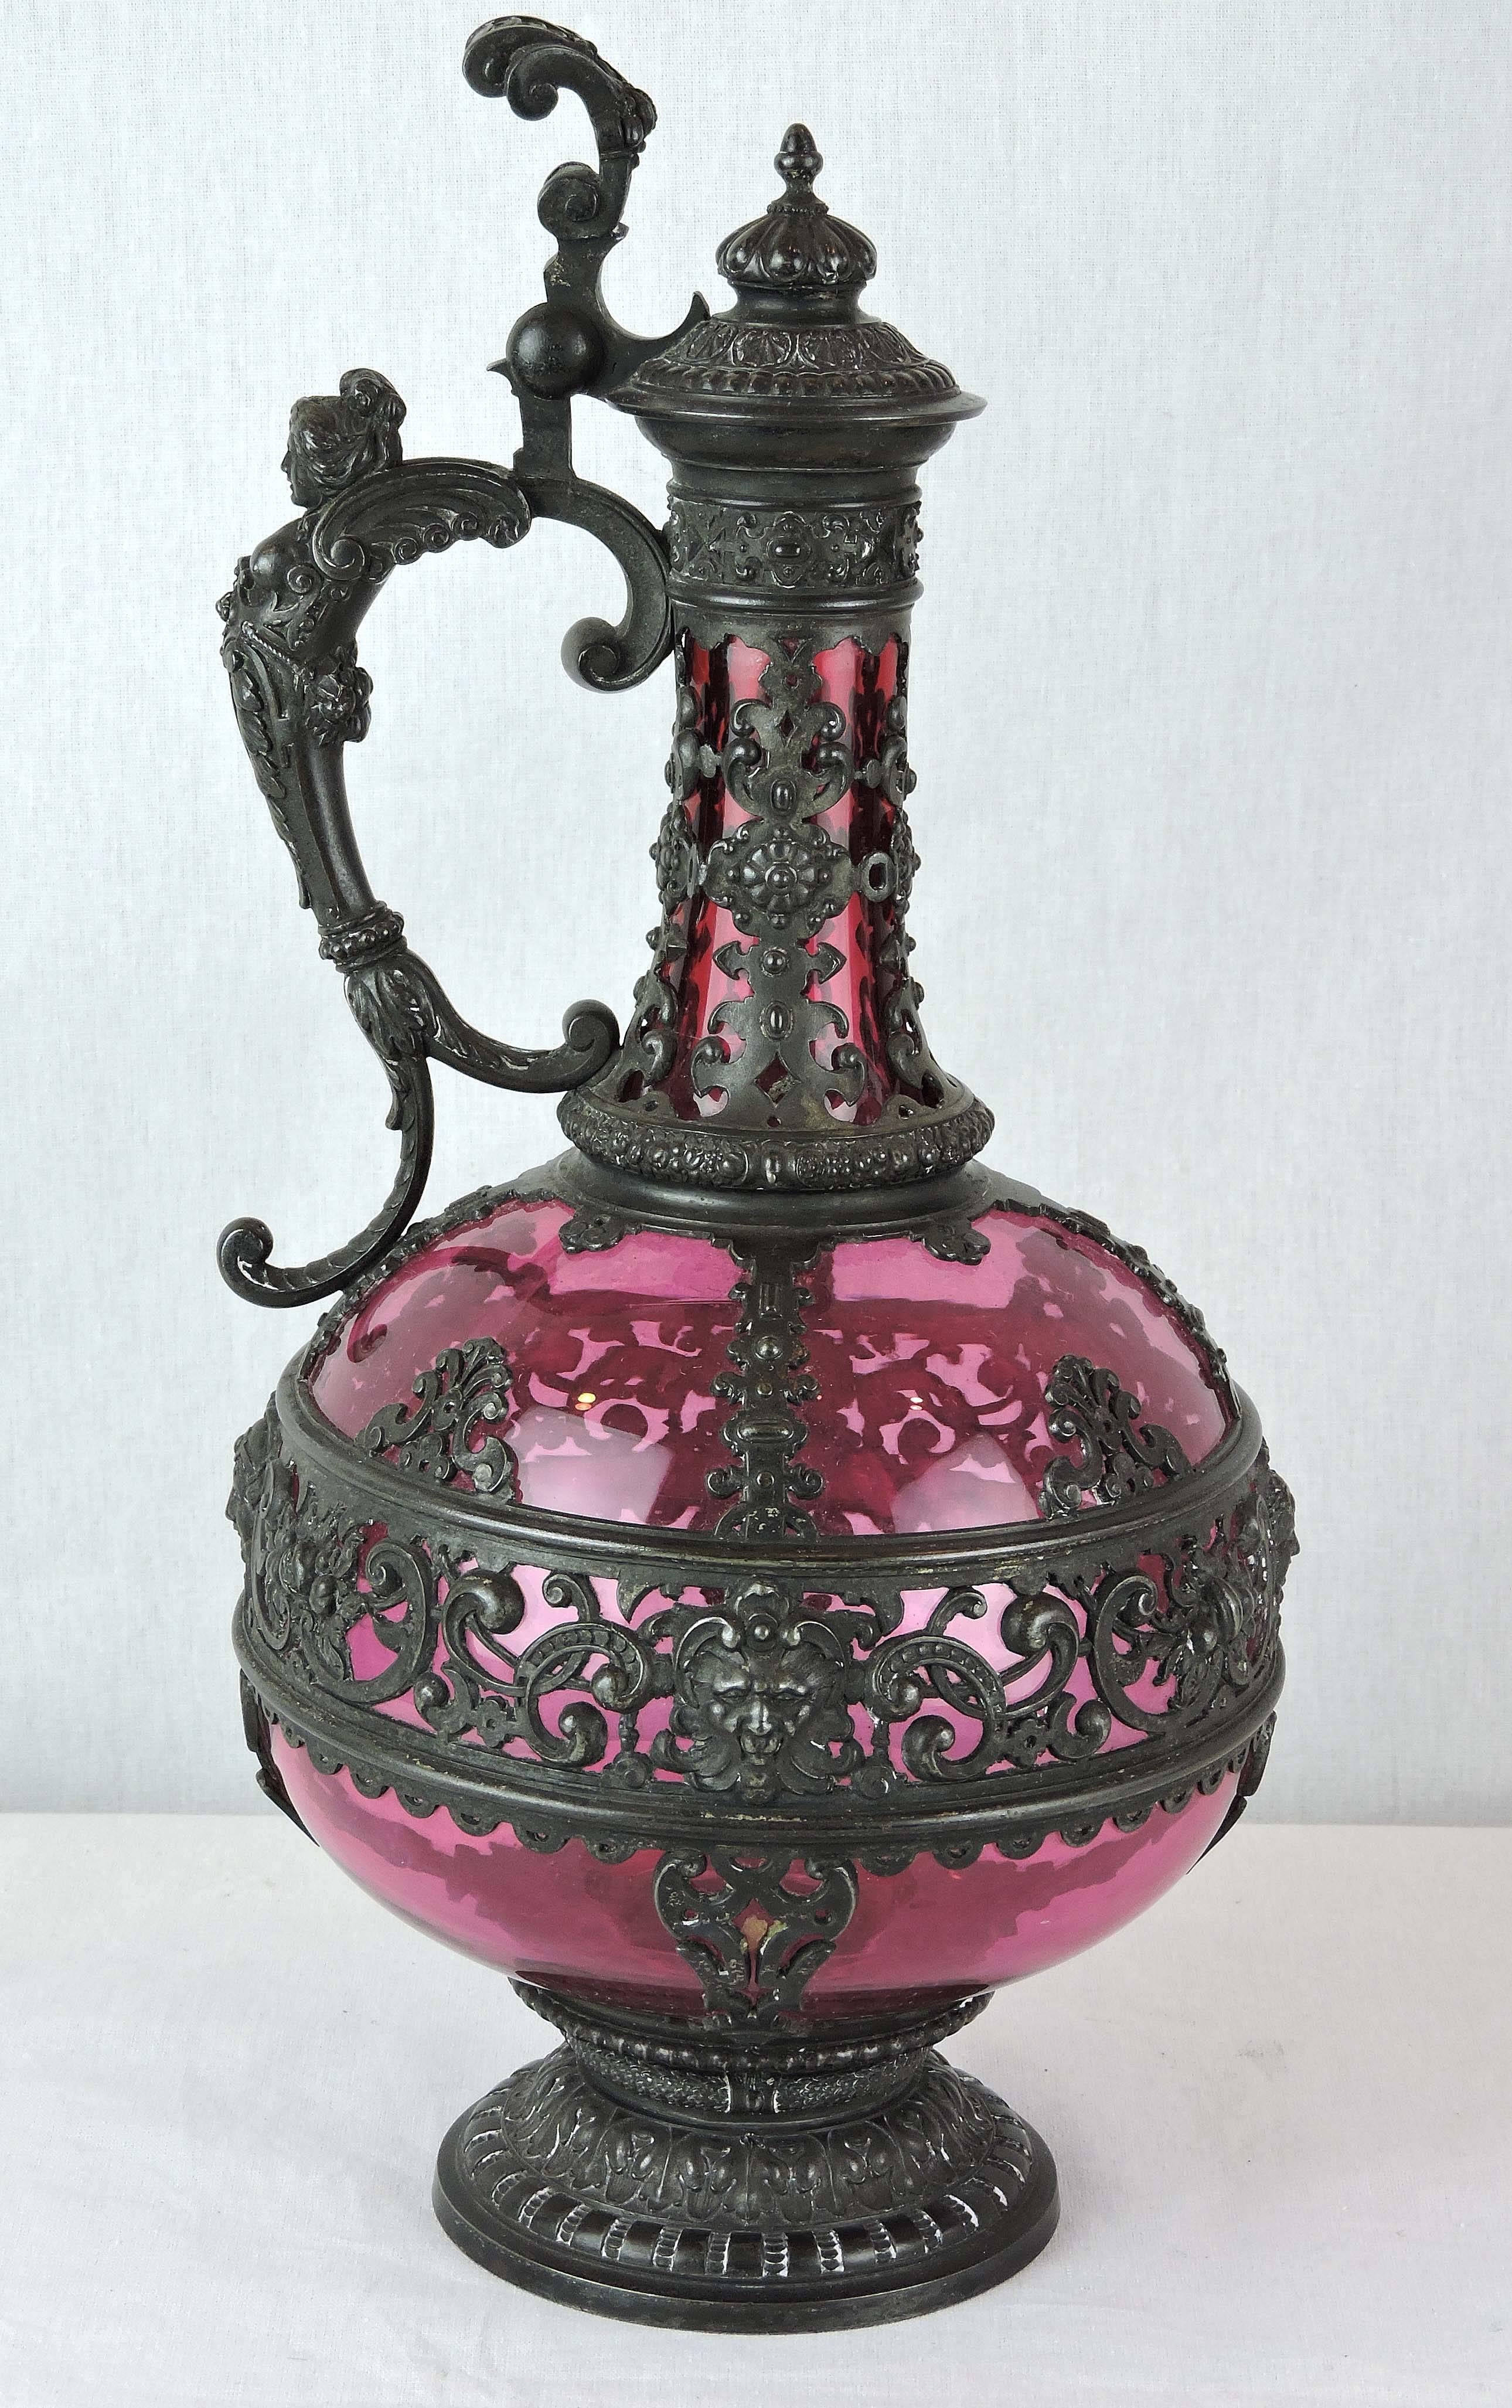 This is a 19th century Jacobean Revival cranberry ewer: The slender, elongated neck joined to a globe-shaped body, mounted within a metalwork frame, topped with a domed hinged lid, with a foliate lever rising above the handle, in the form of a